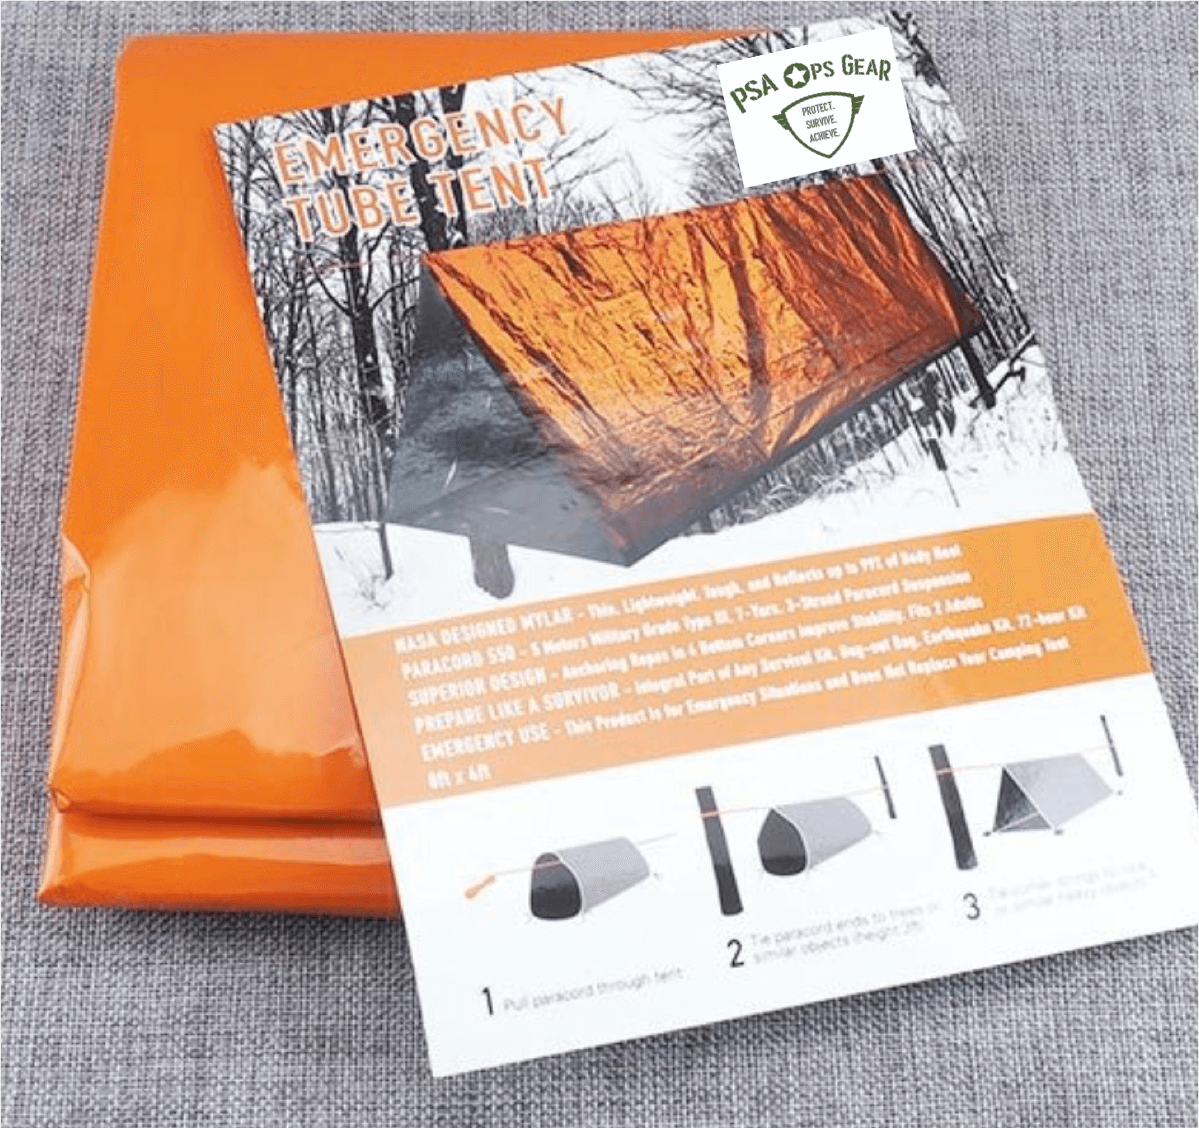 Emergency Shelter Tent (Twin Pack - Set of 2)